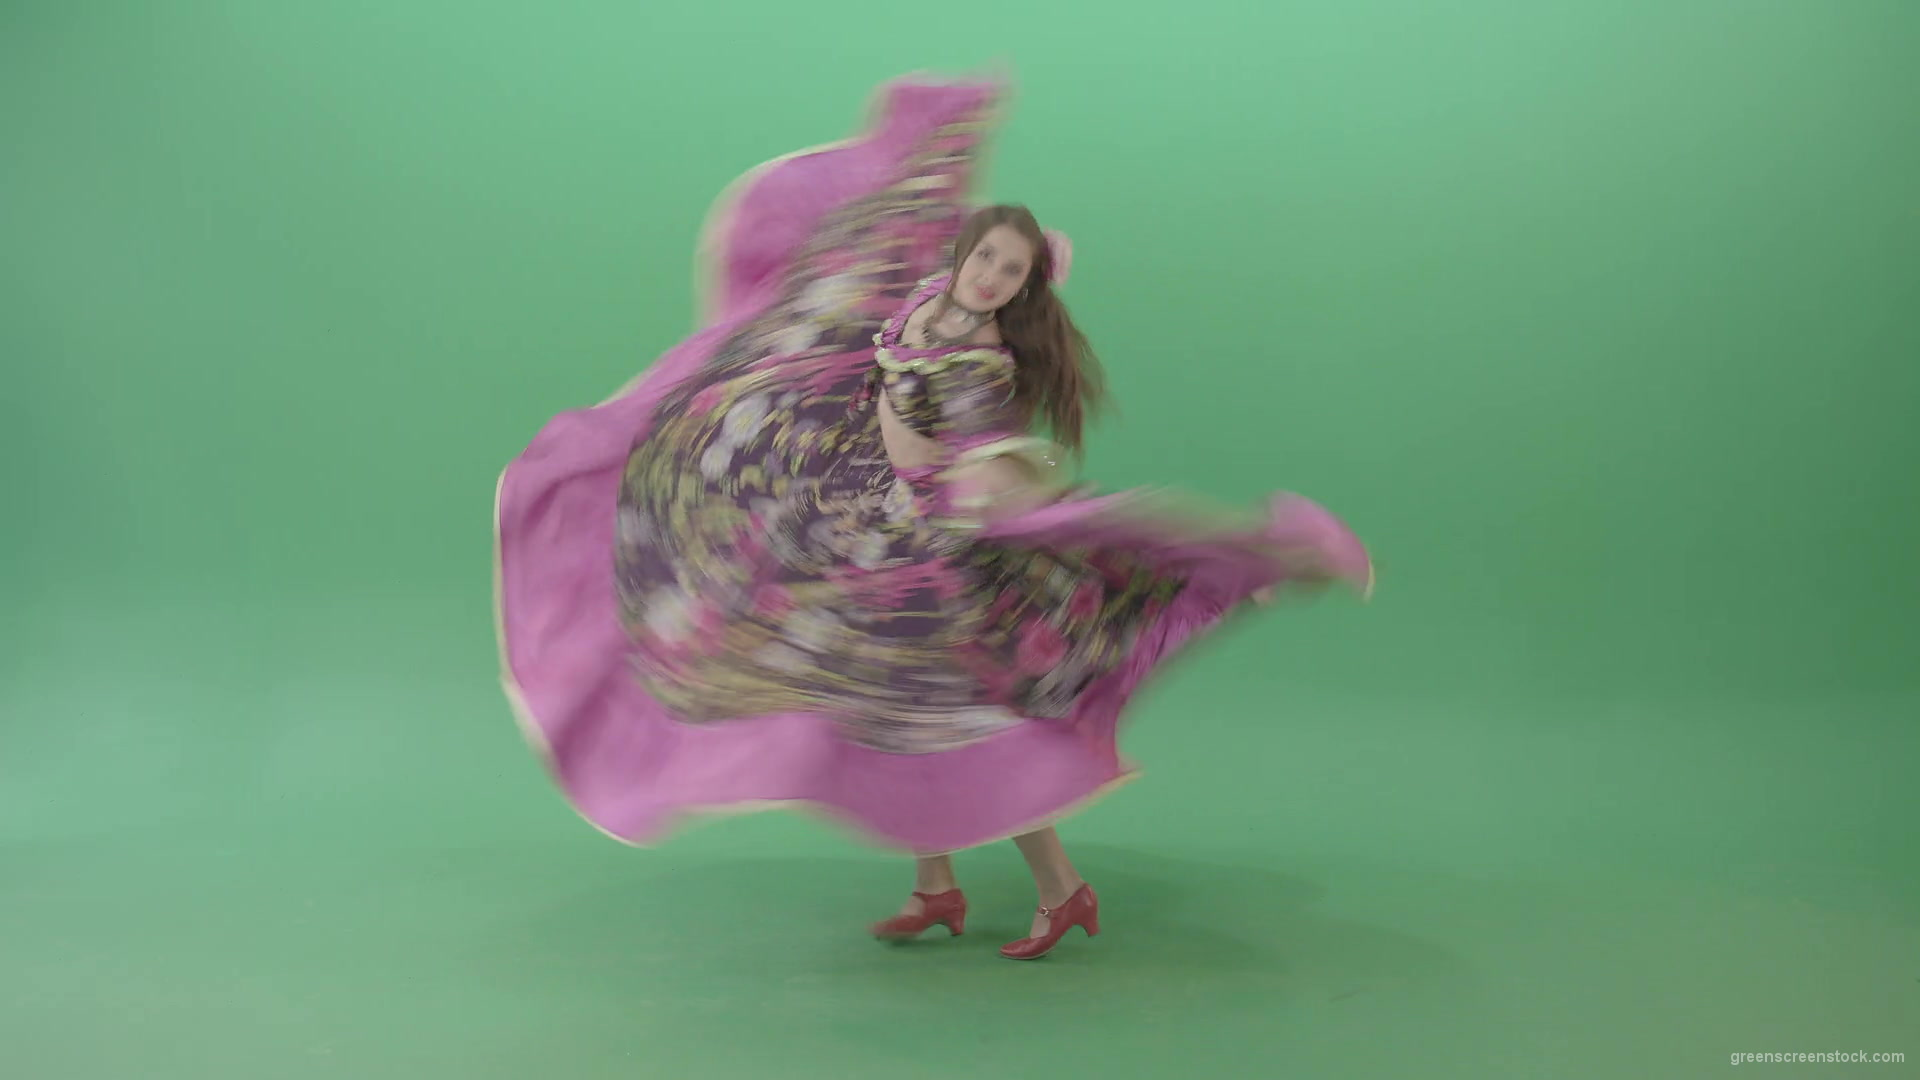 Romatic-moldova-girl-dancing-in-roma-gypsy-dress-isolated-on-green-screen-4K-stock-video-footage-1920_005 Green Screen Stock